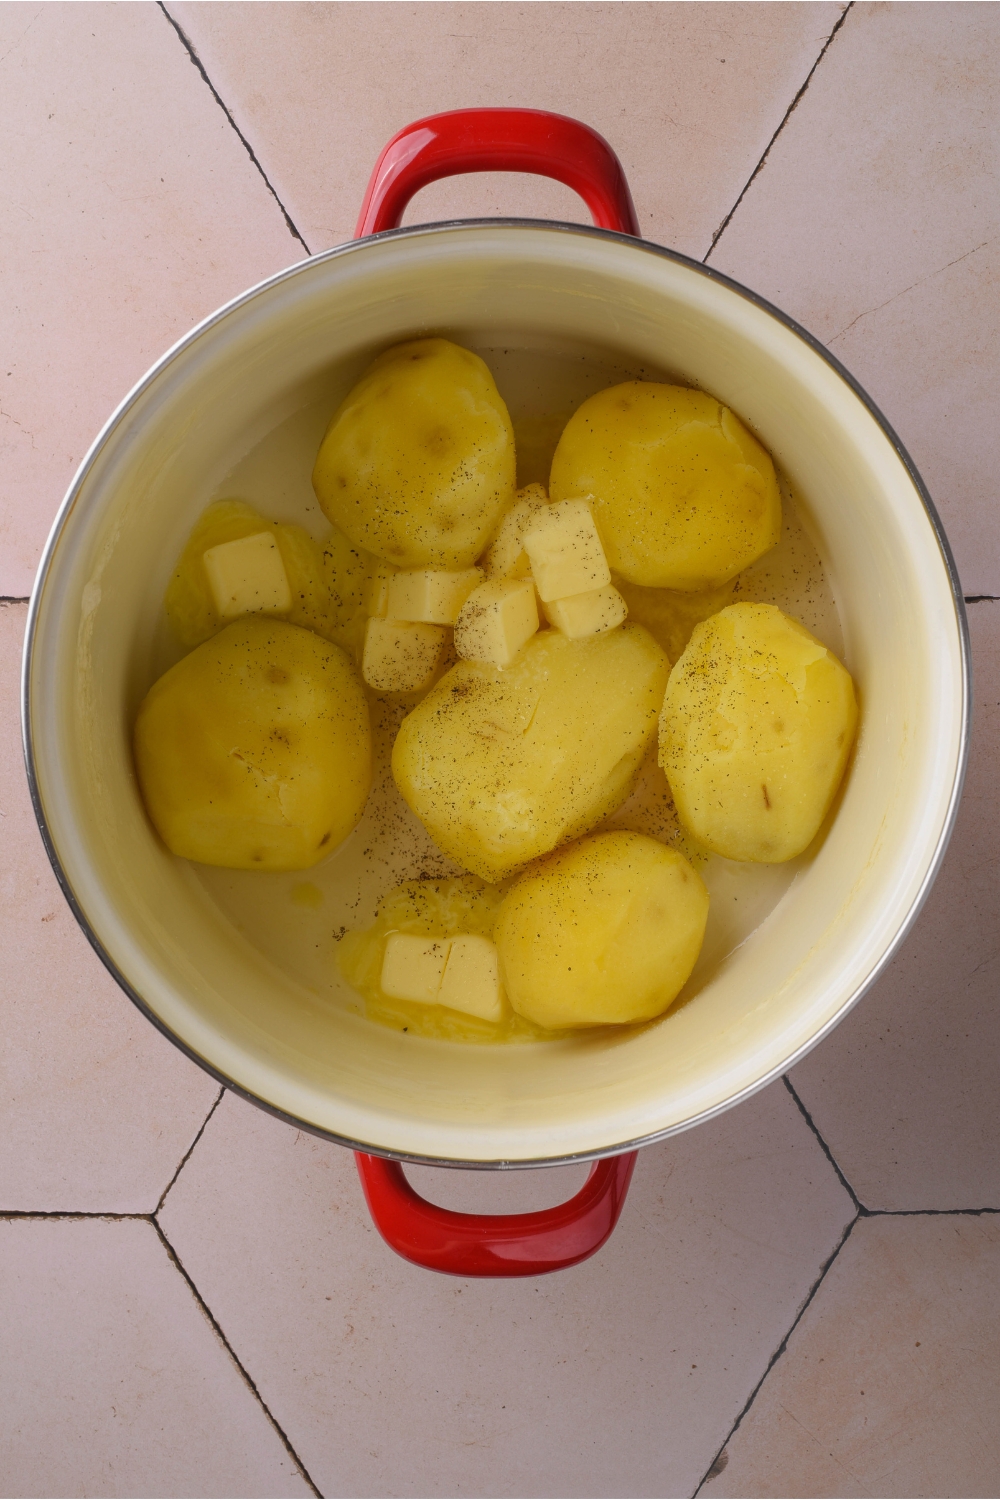 A large pot filled with peeled and boiled potatoes, butter cubes, salt, and pepper. The butter is melting in the pot.